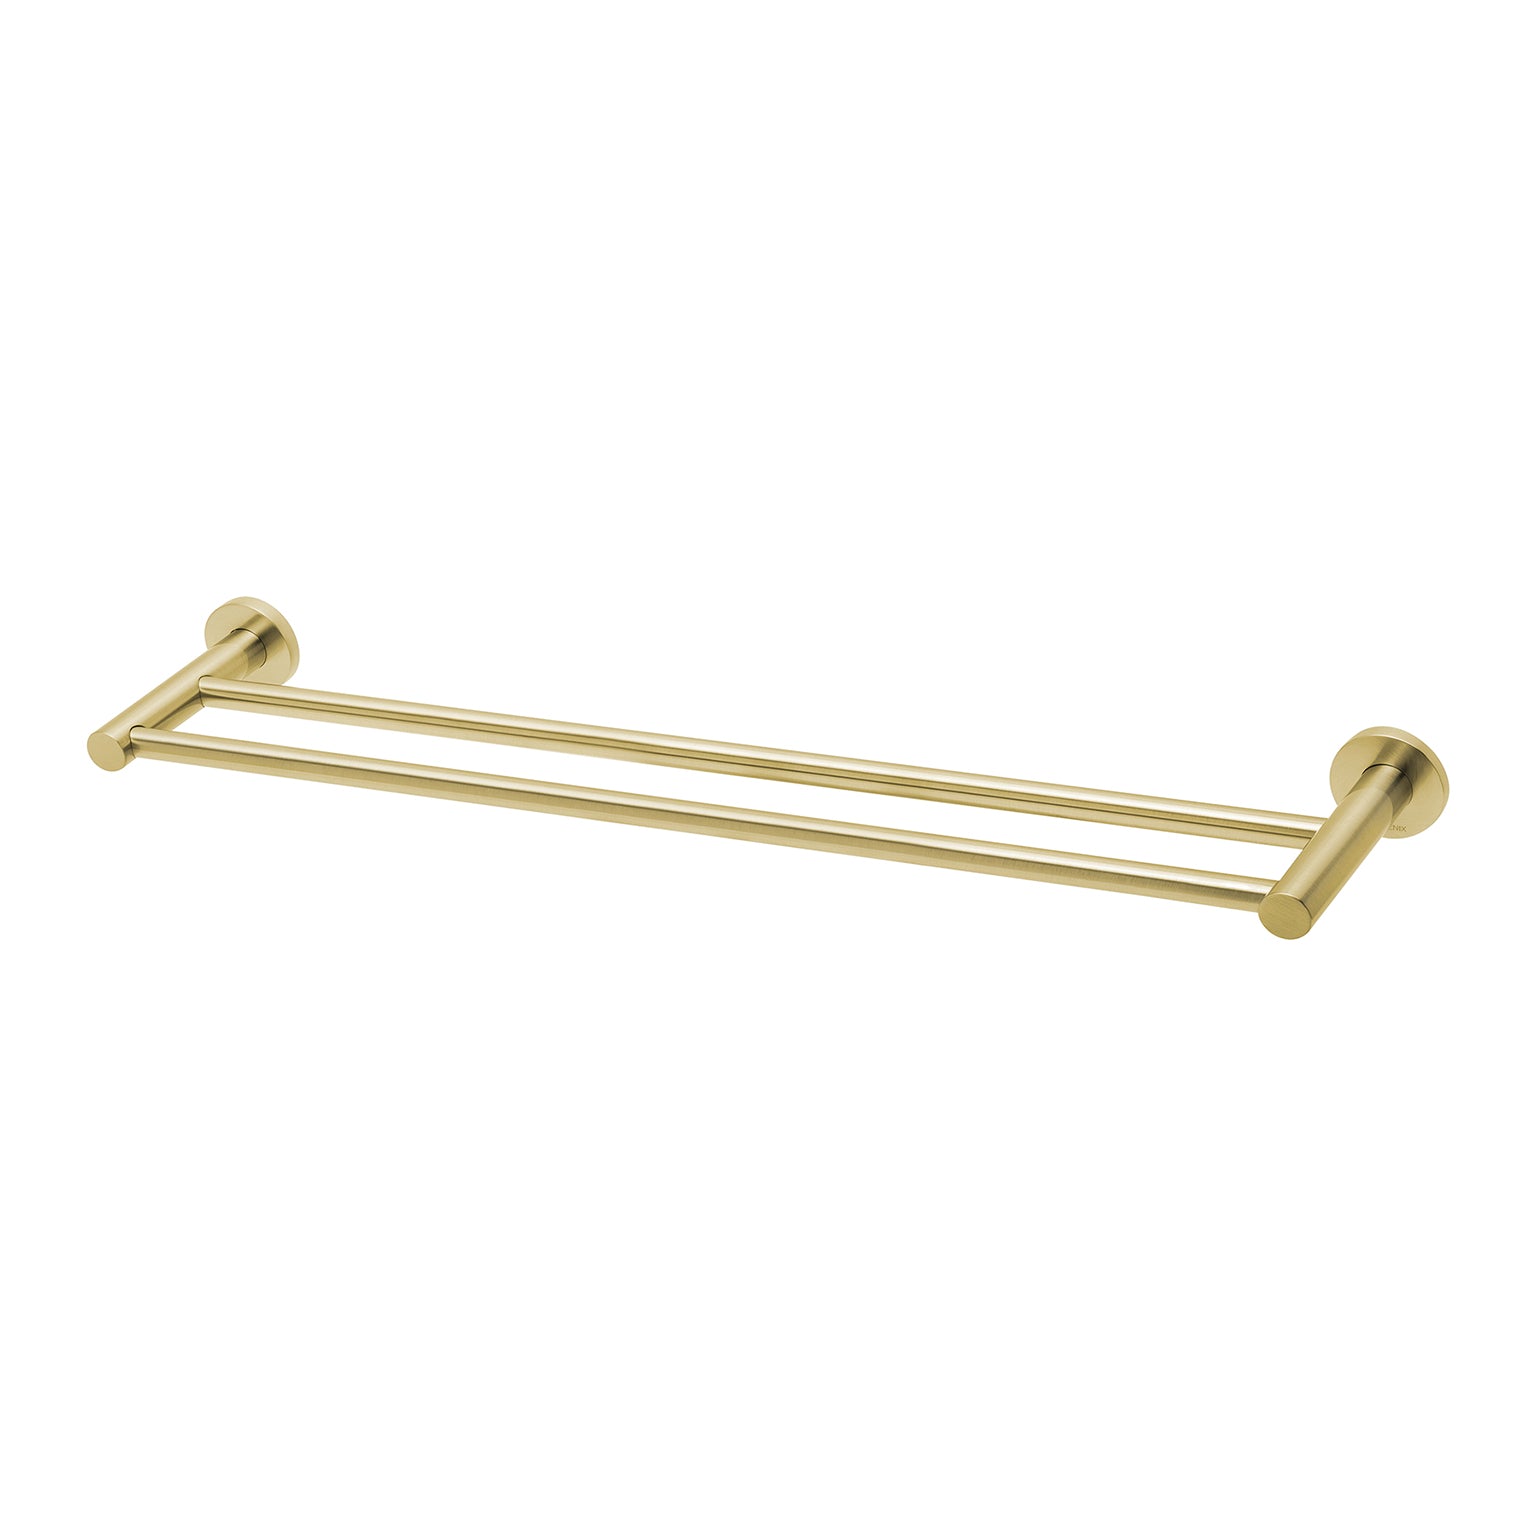 PHOENIX RADII DOUBLE NON-HEATED TOWEL RAIL ROUND PLATE BRUSHED GOLD 600MM AND 800MM